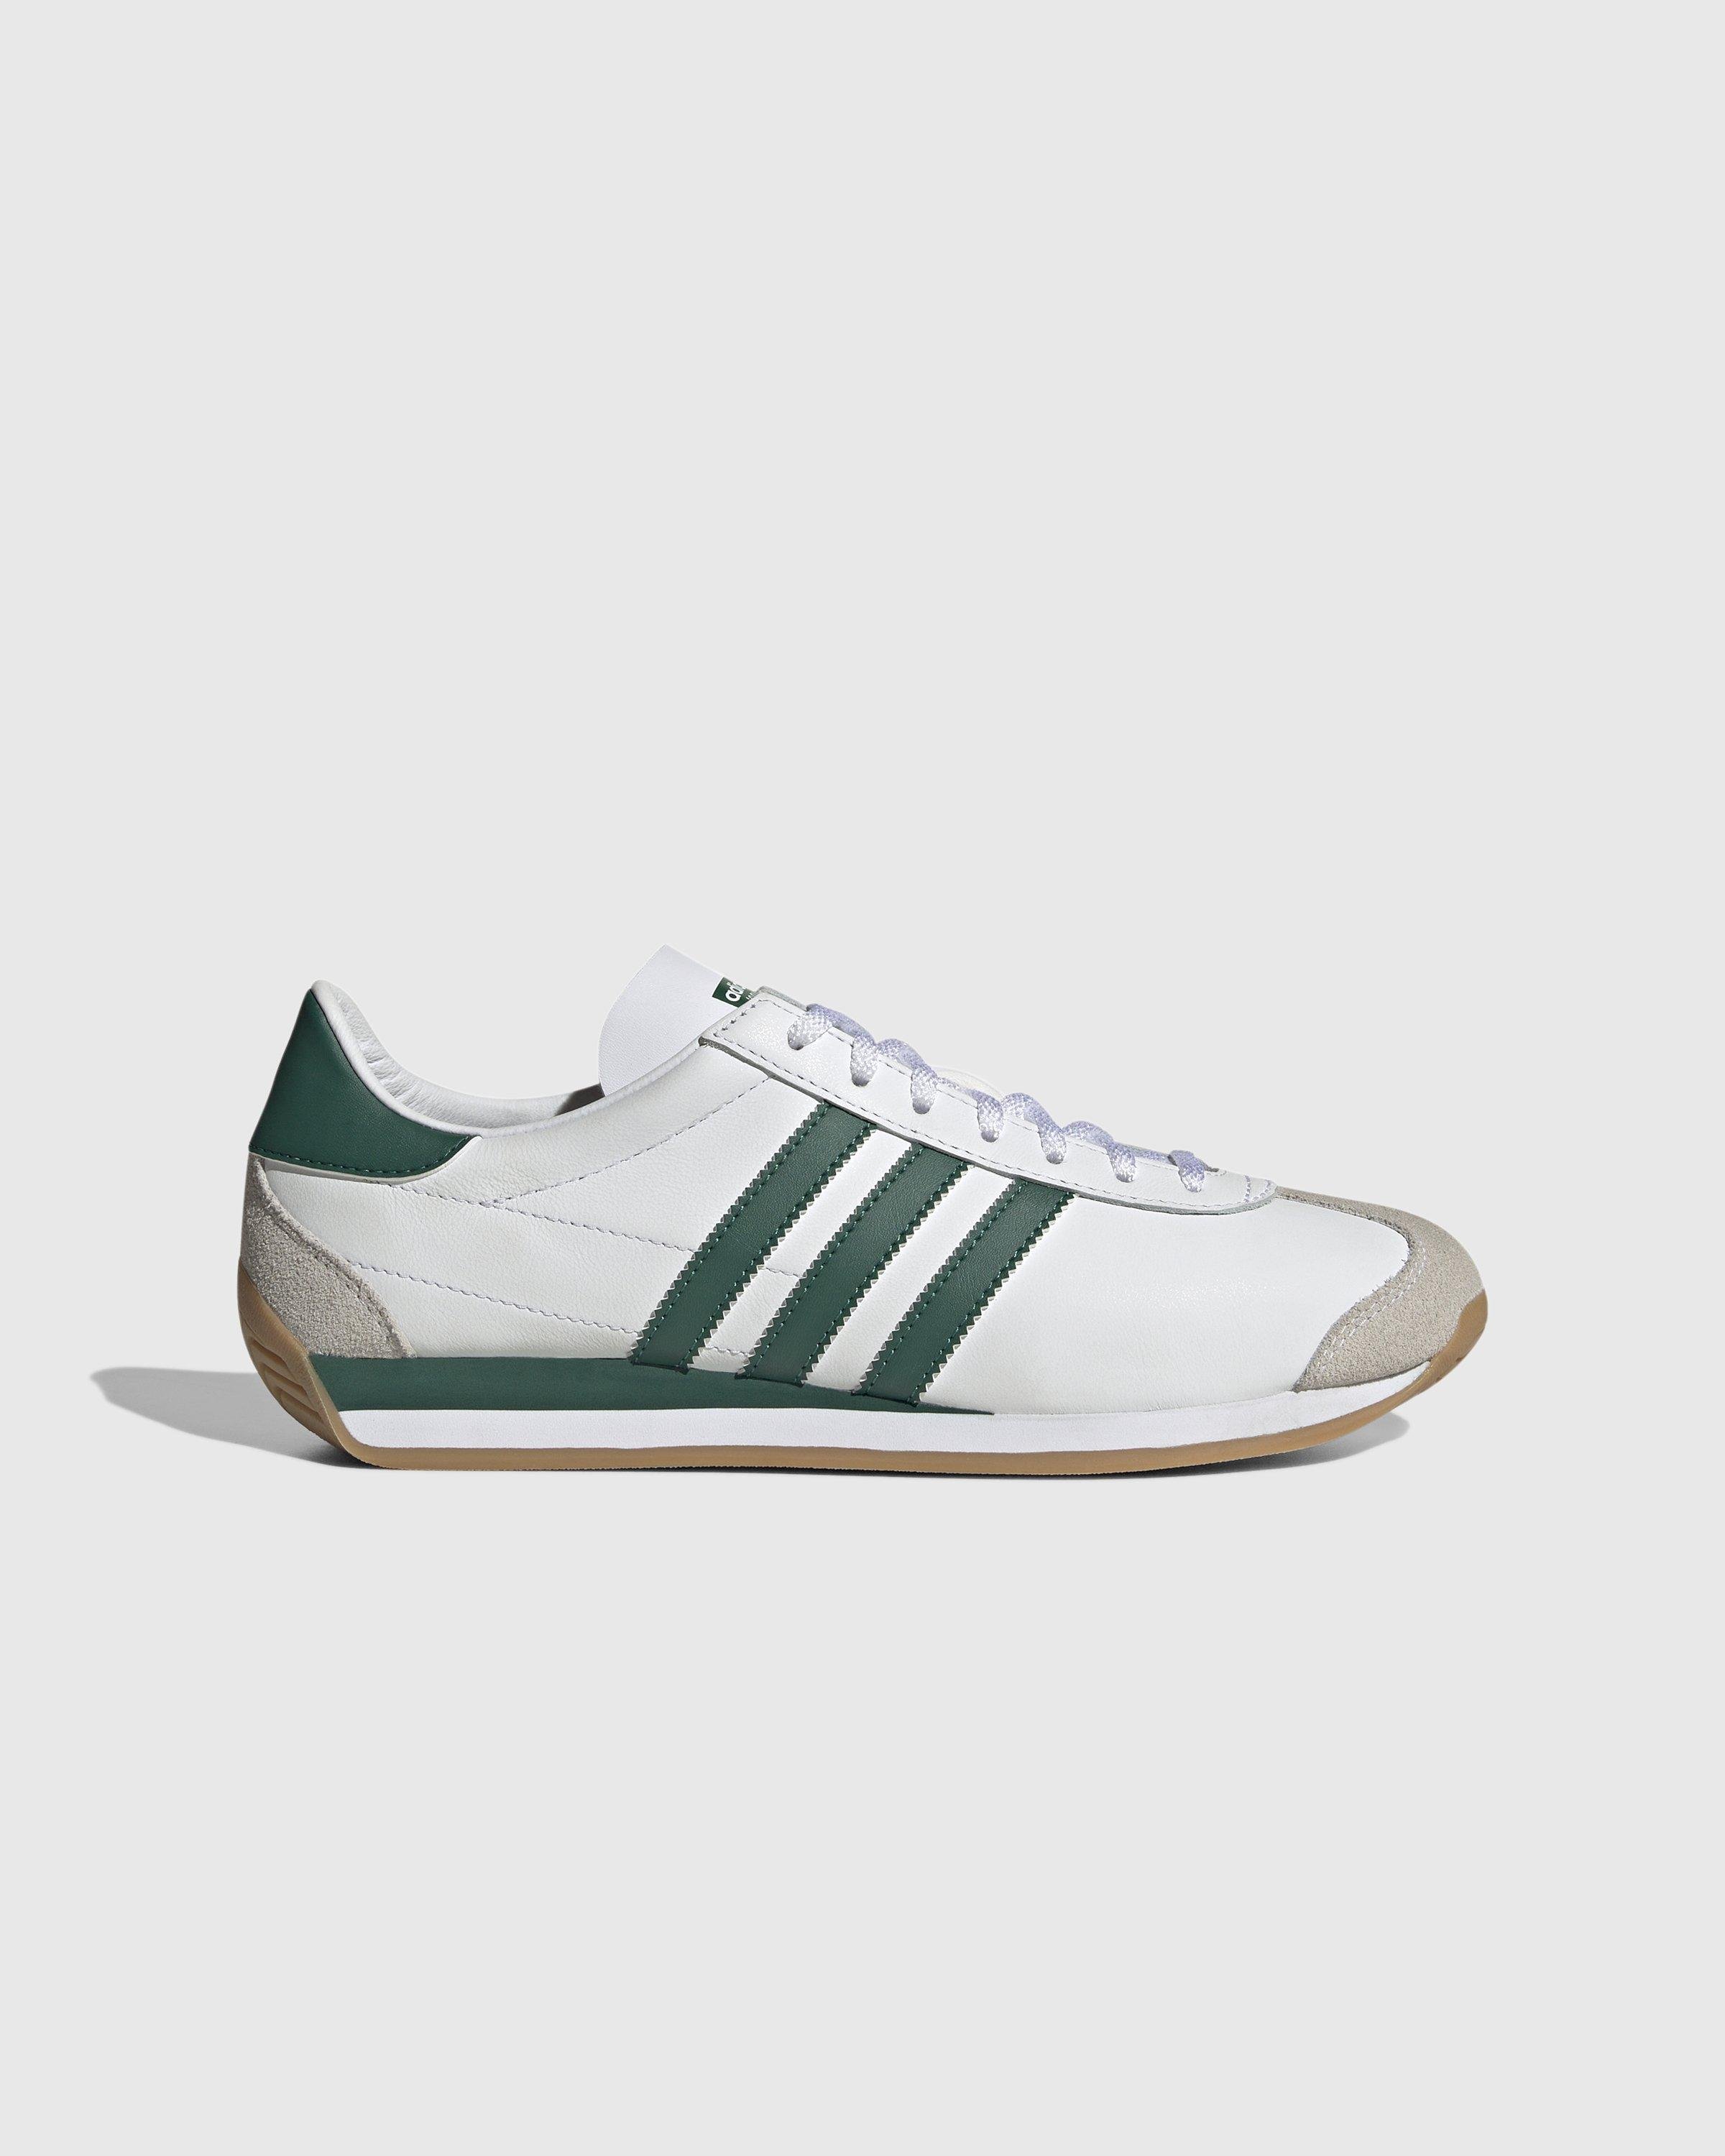 AdidasCountry OG Cloud White/Collegiate Green by HIGHSNOBIETY